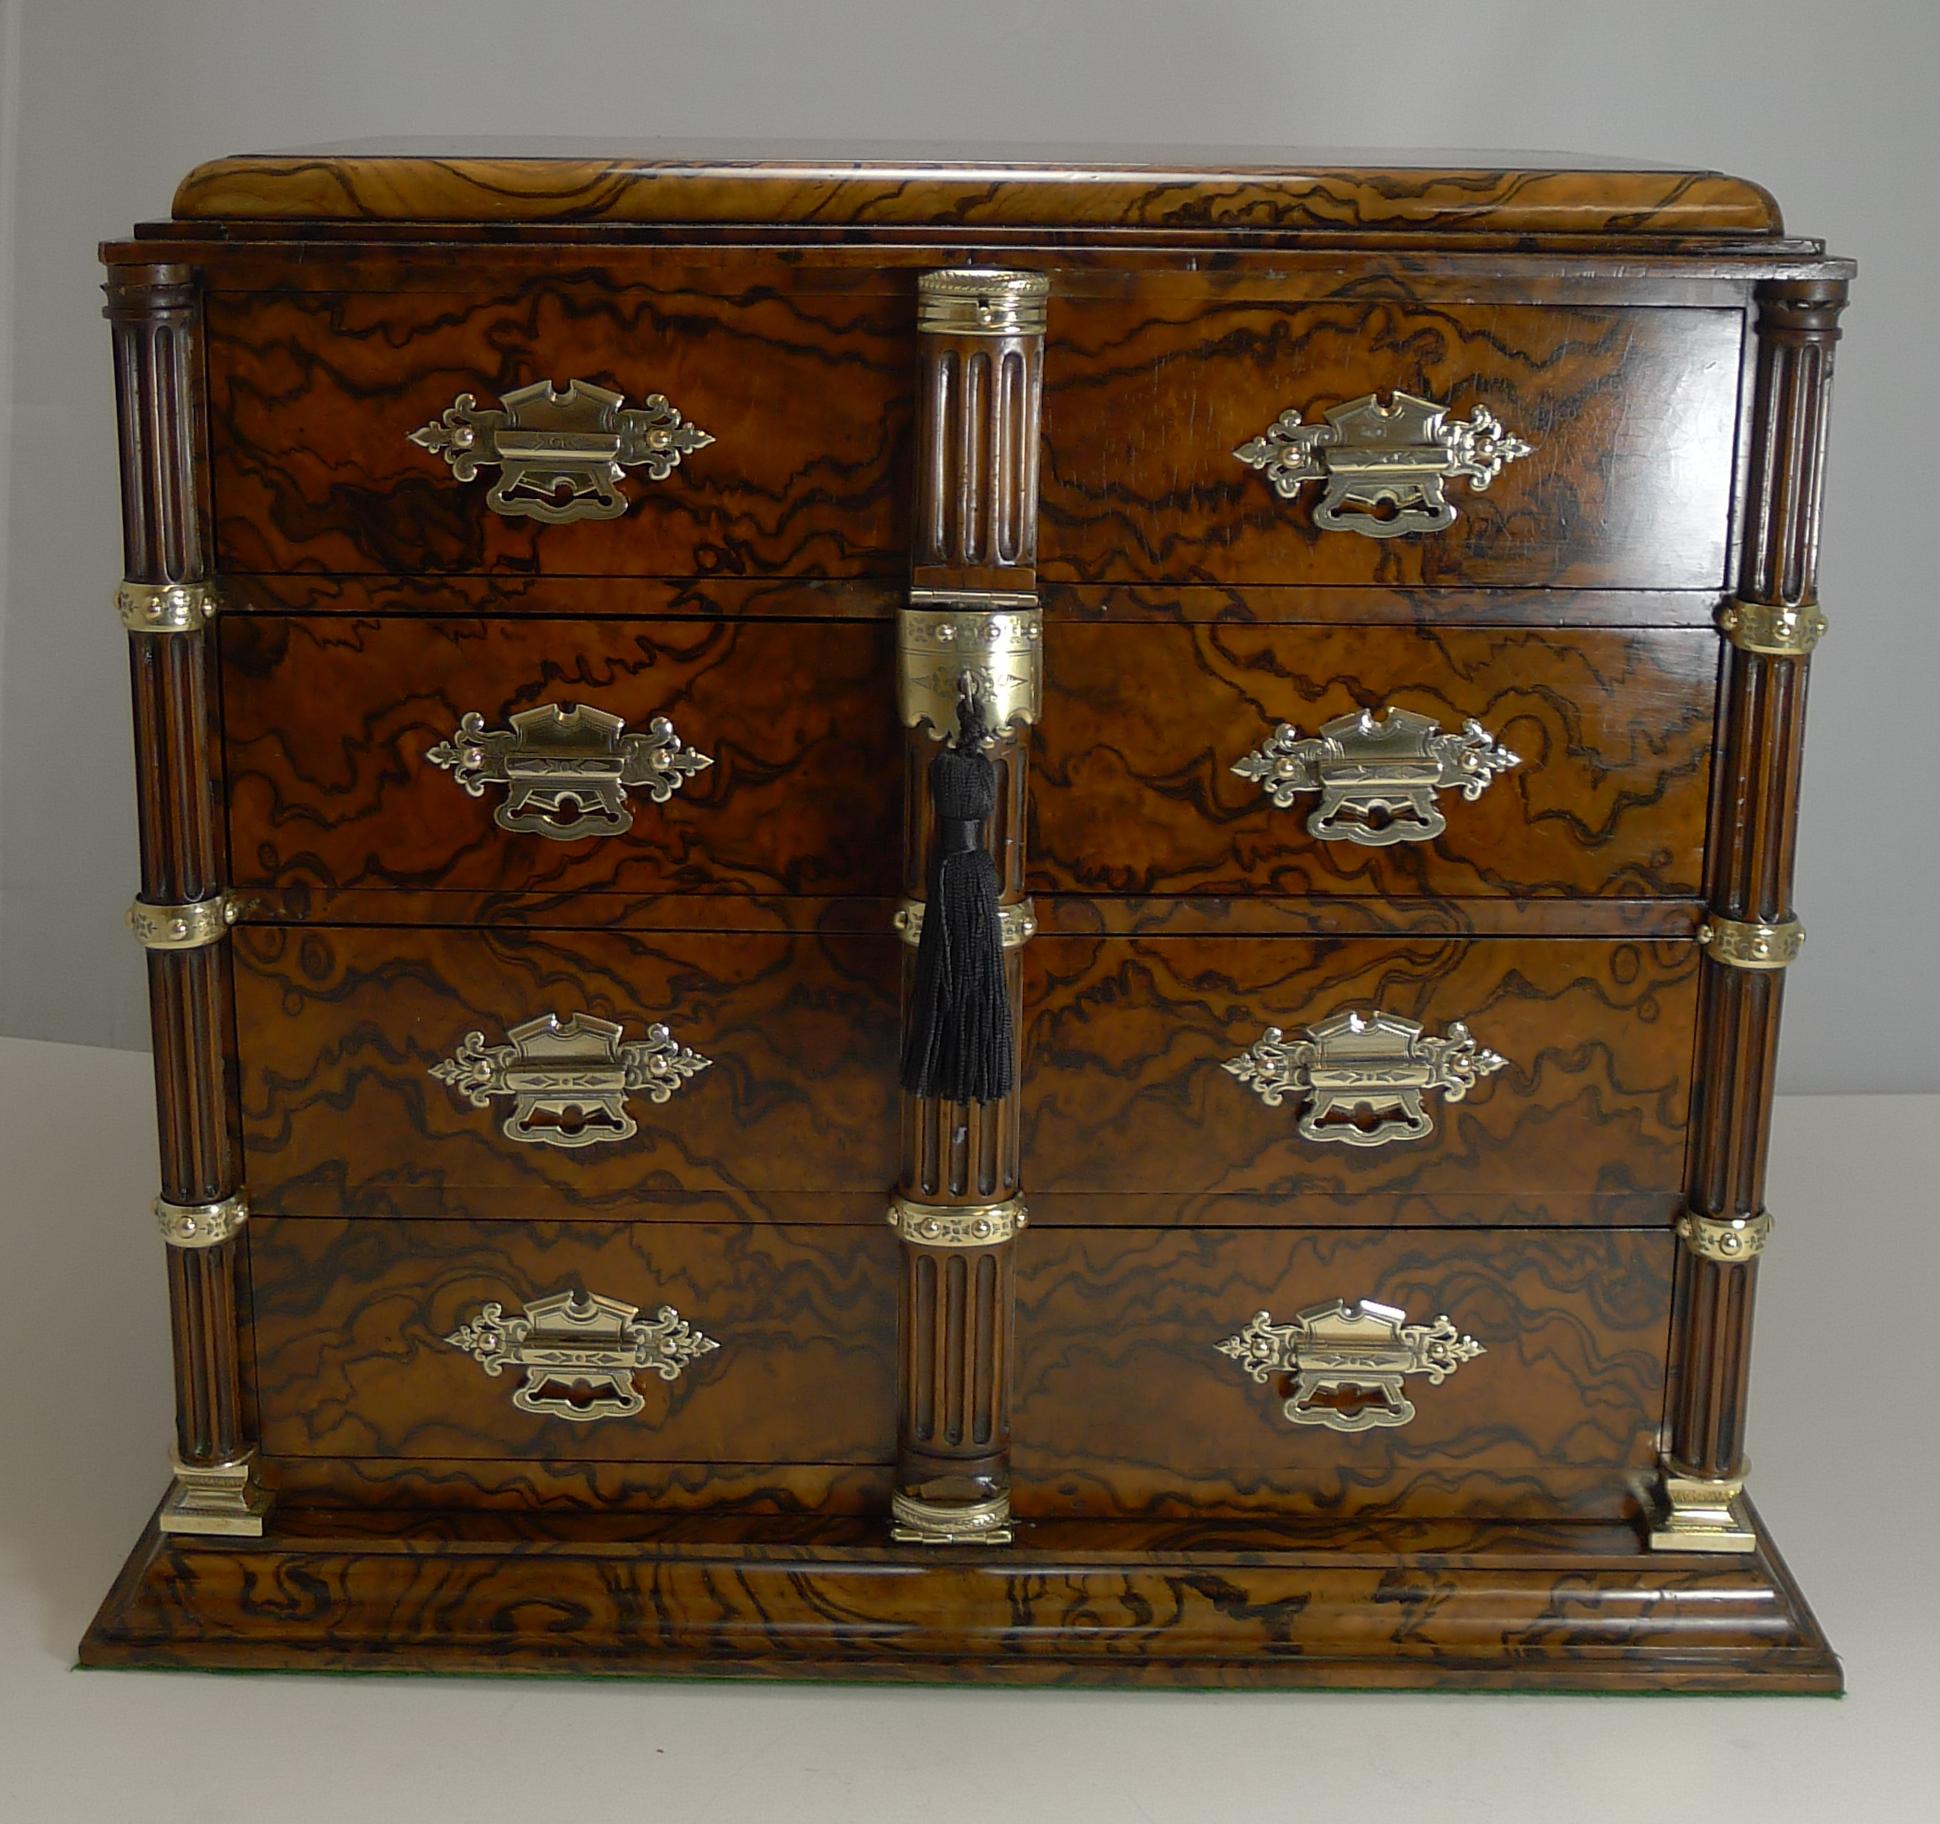 About as fine as they get, this large Burr walnut cigar cabinet is a magnificent quality box beautifully made.

Each corner has a carved column with a polished brass base and brass mounts around the columns, all beautifully hand engraved. All of